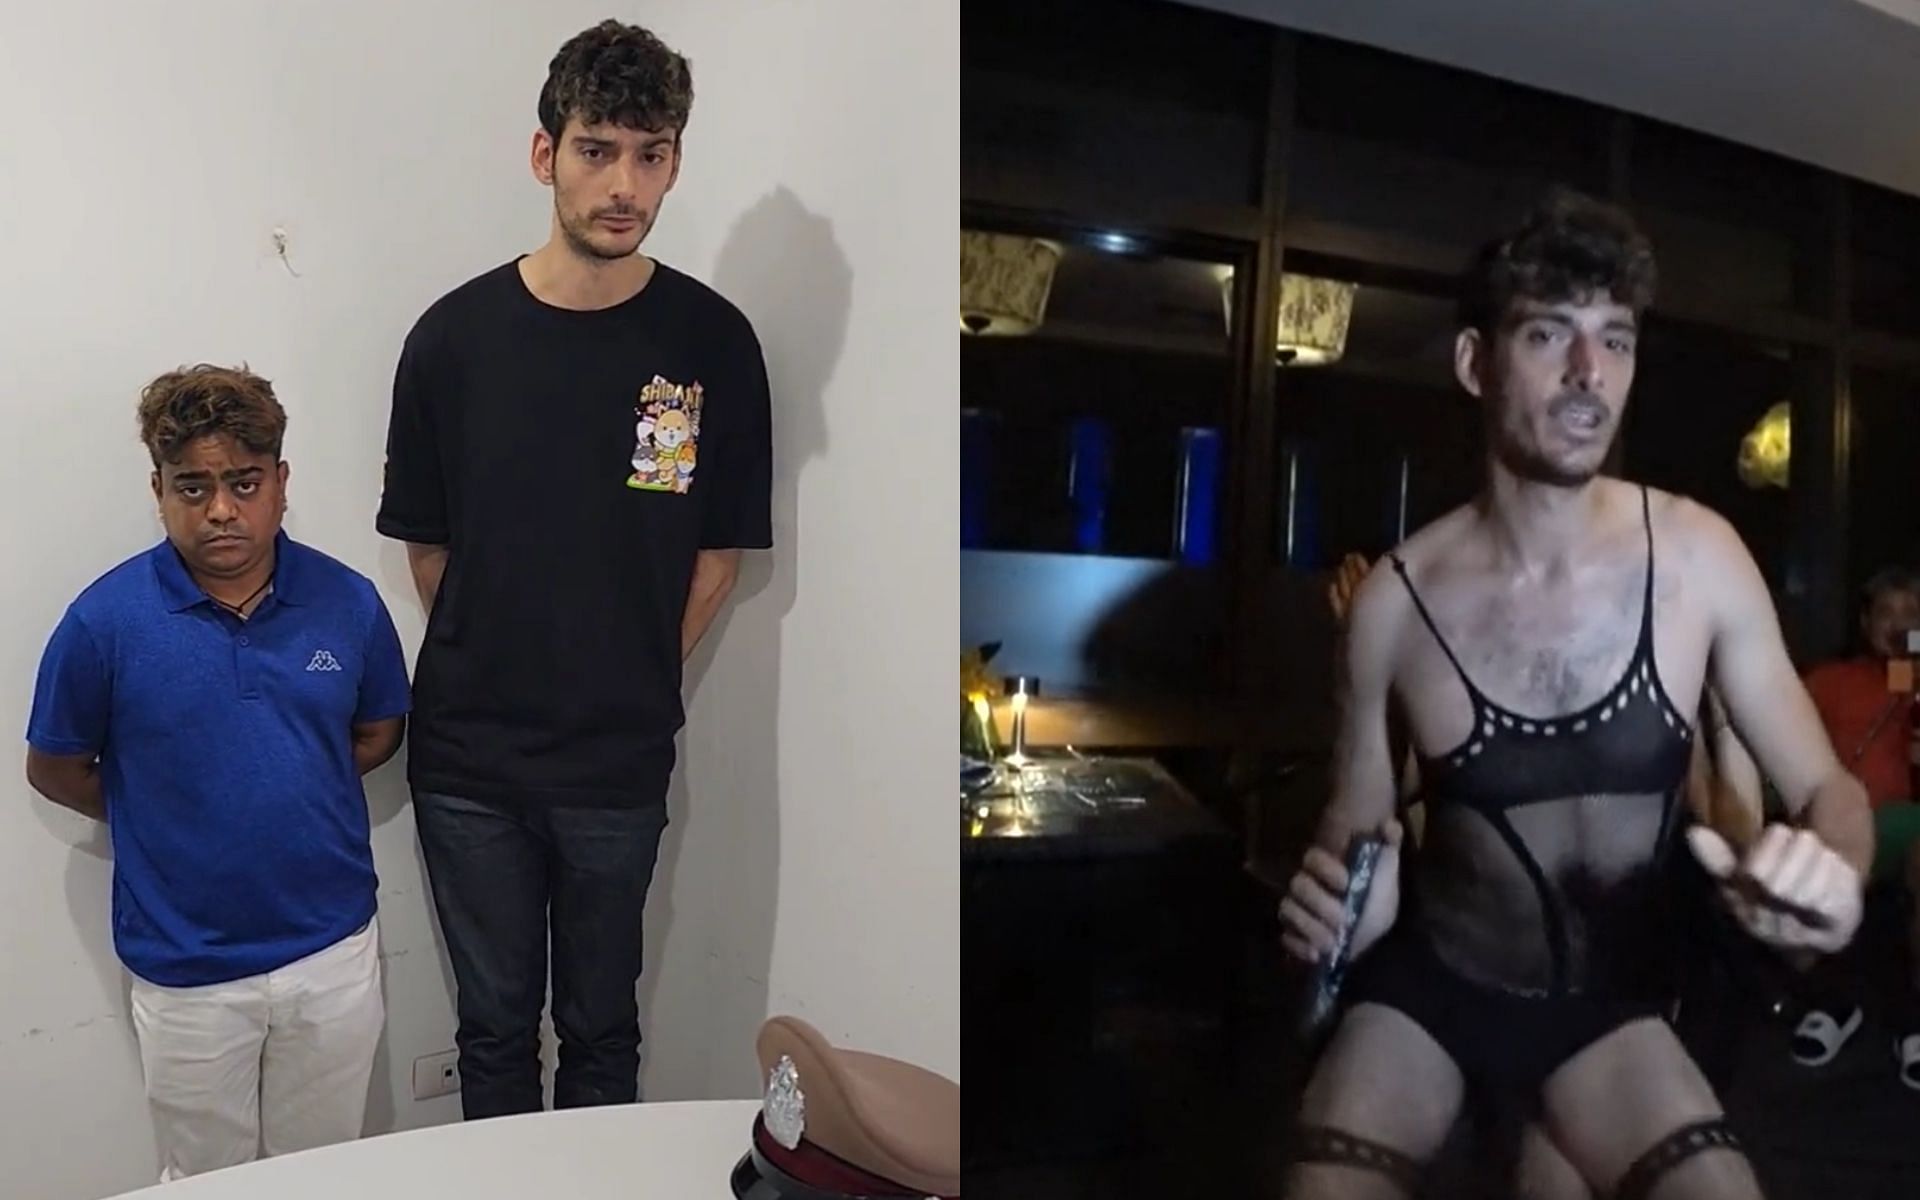 Exploring why Ice Poseidon was arrested in Thailand (Images via Ice Poseidon/Twitter and r/LivestreamFail subreddit)